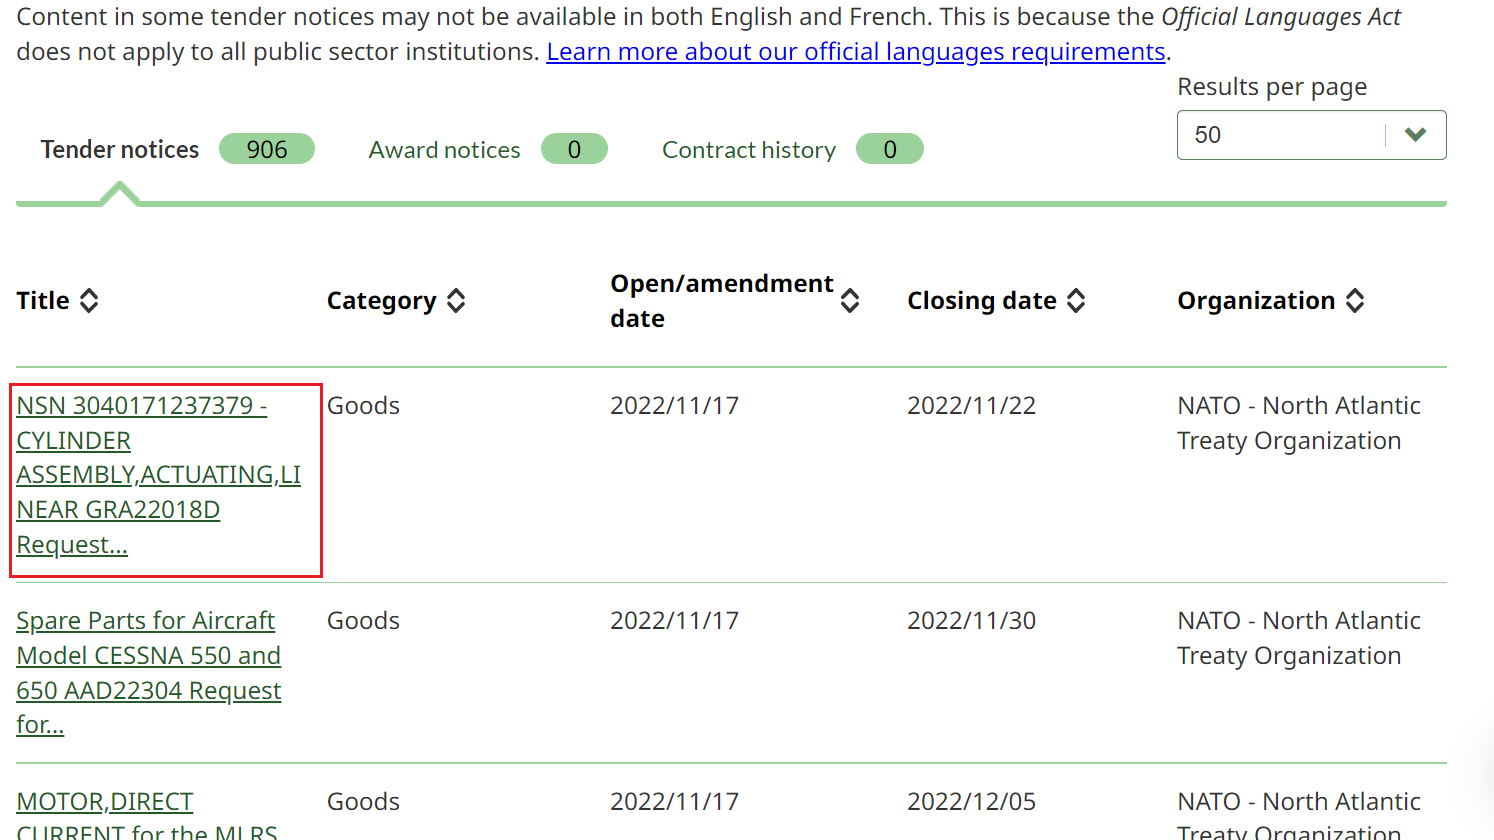 A screenshot of the Tender opportunities page, with the title of a NATO tender notice highlighted.